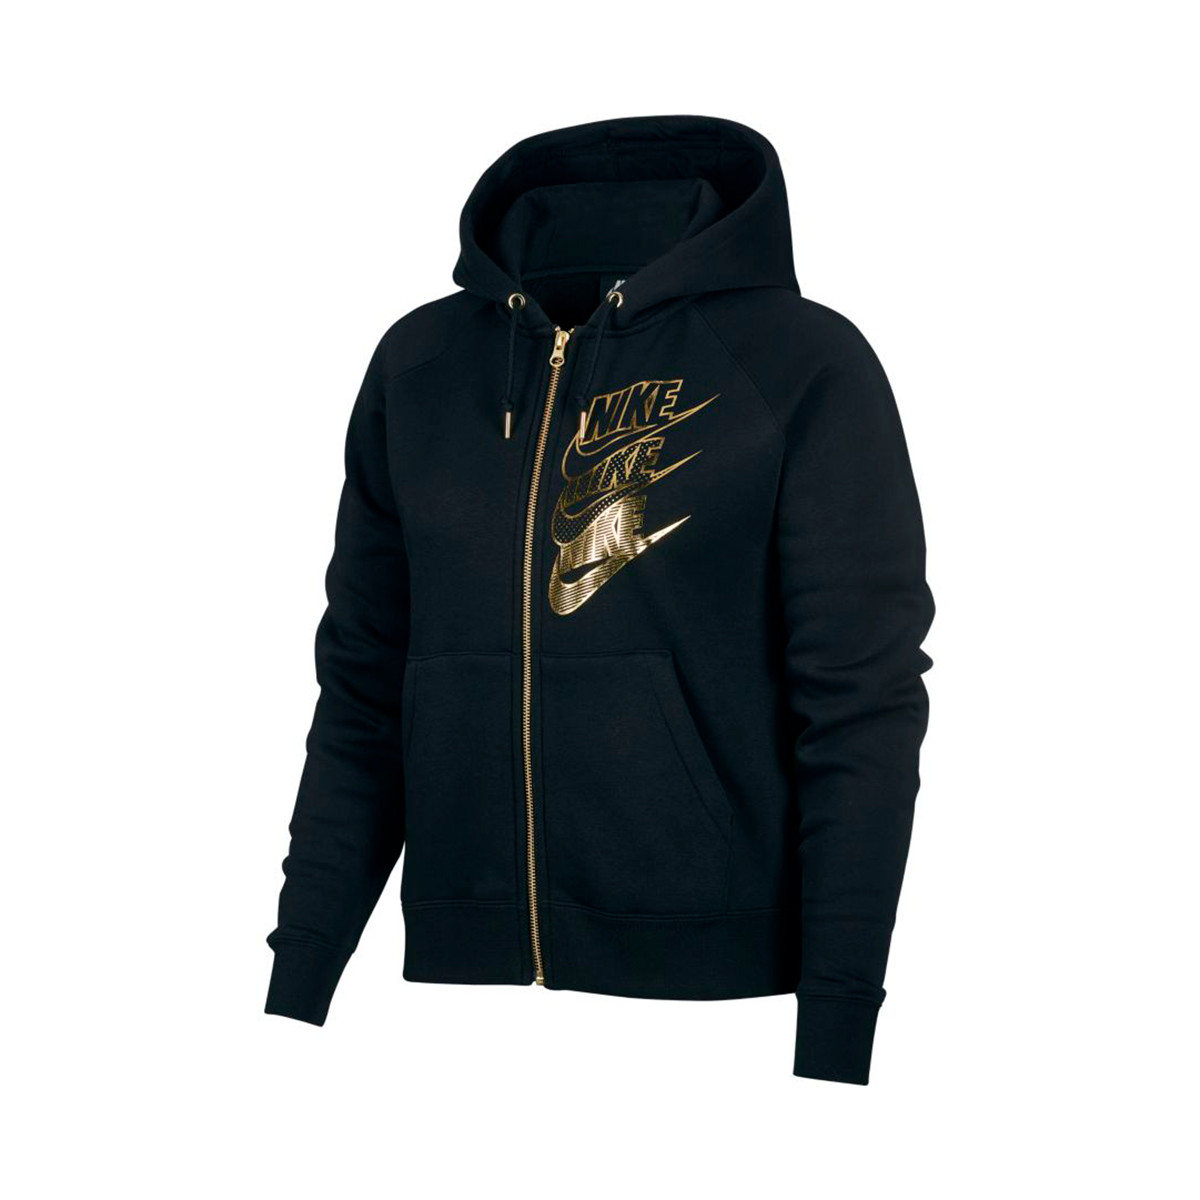 black and gold nike zip up